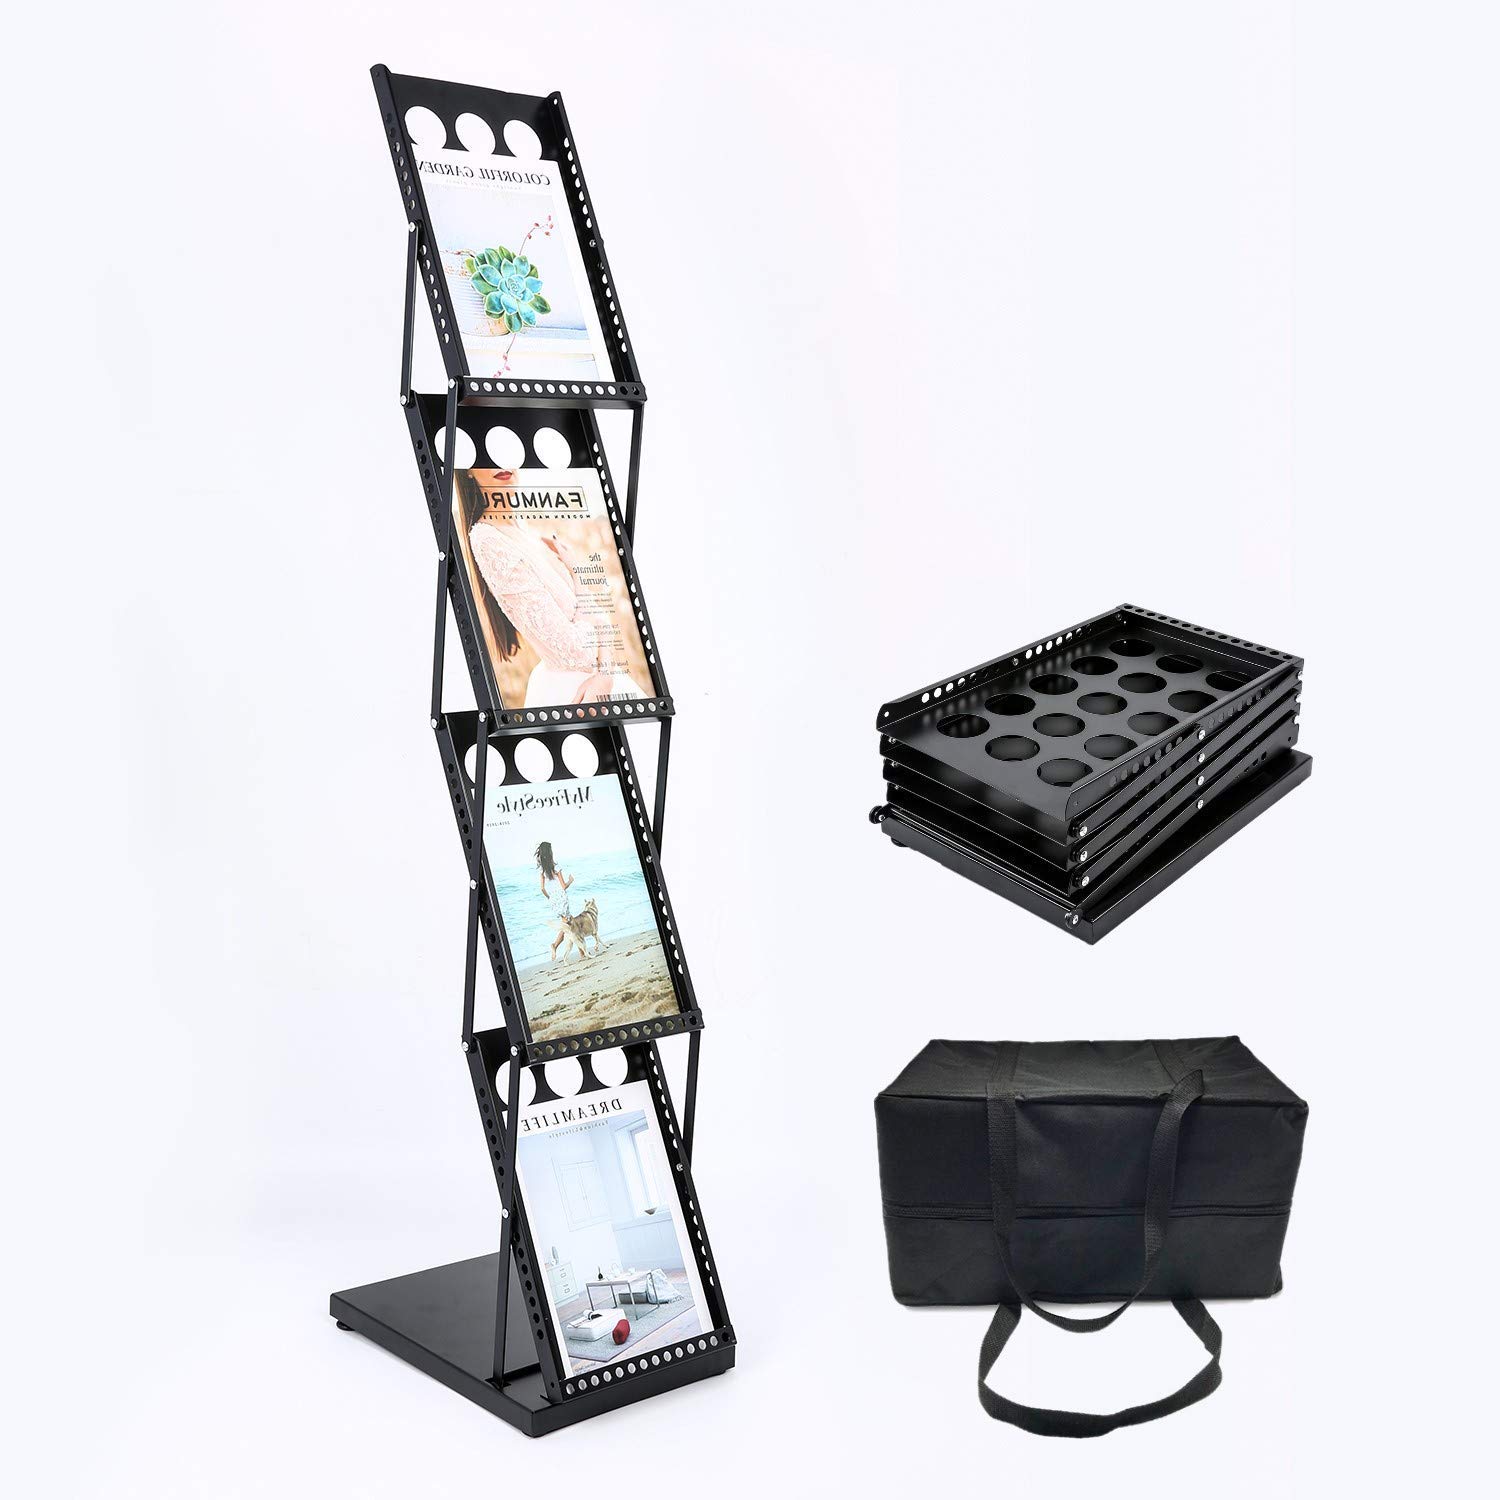 Catalogue Stand, Magazine Stand,Portable Brochure Stand Black